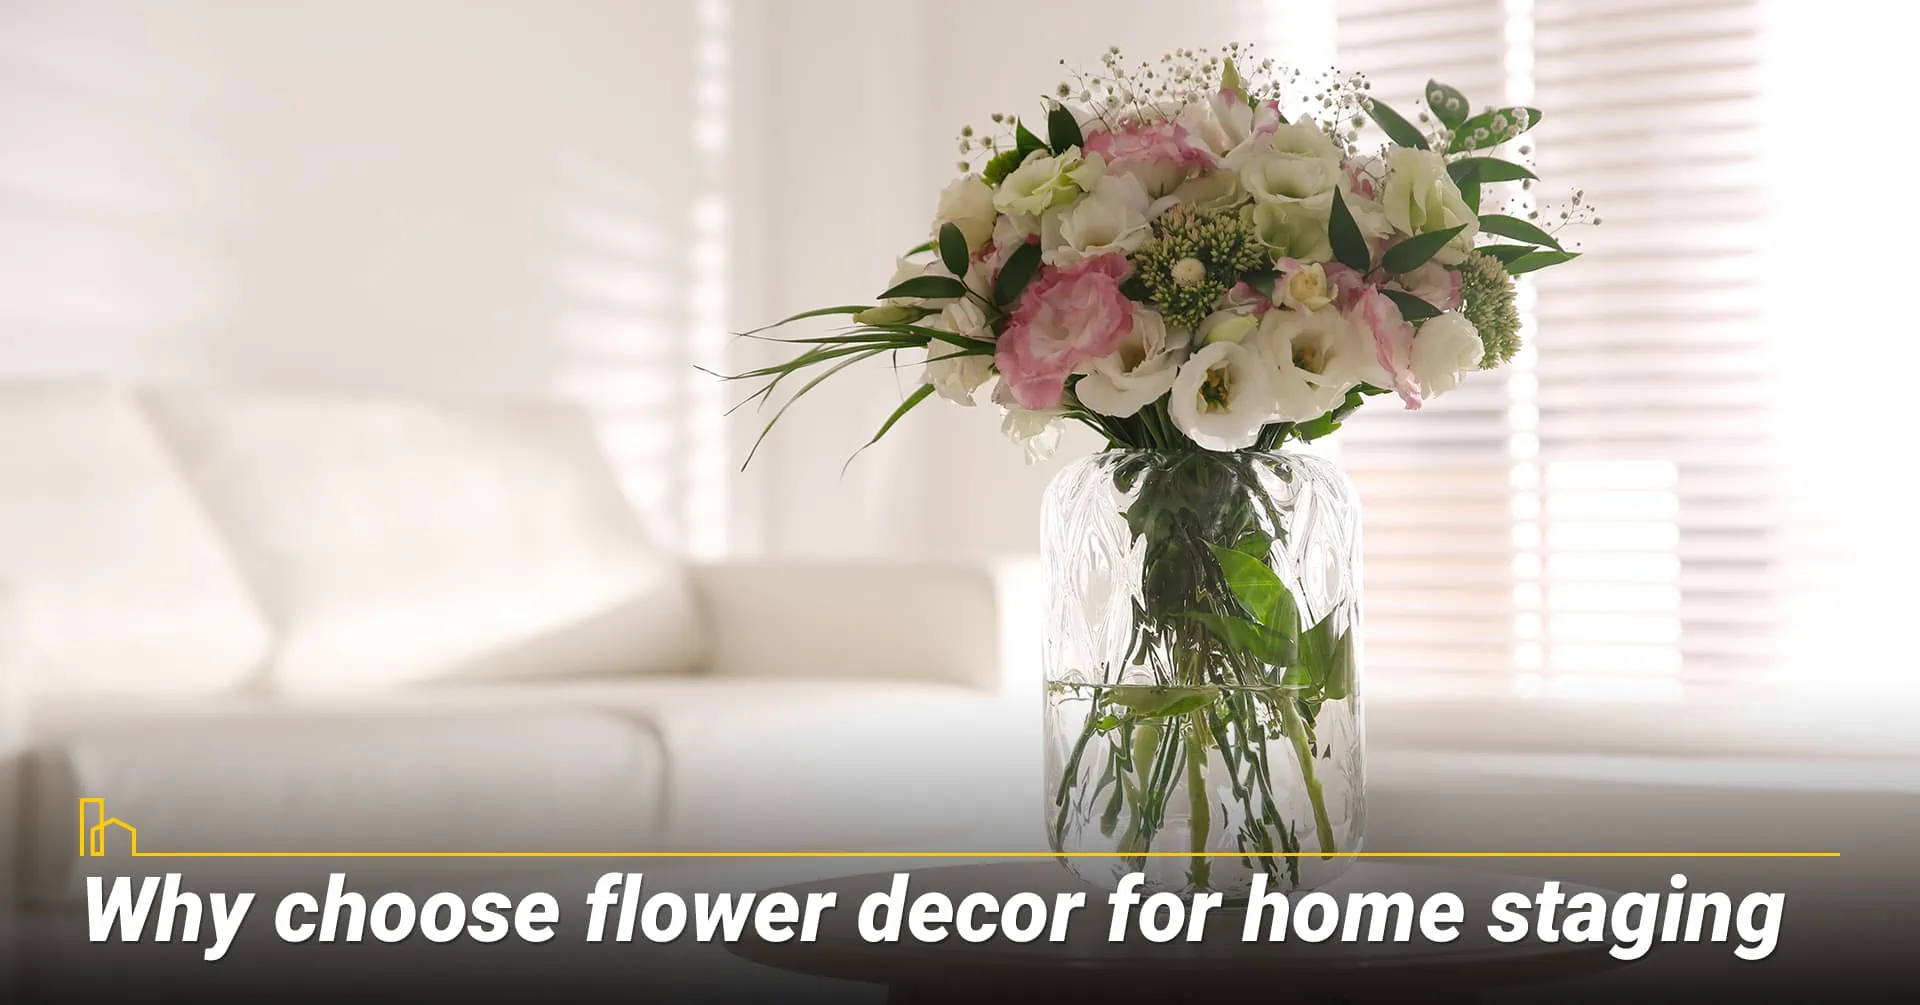 2. Why choose flower decor for home staging